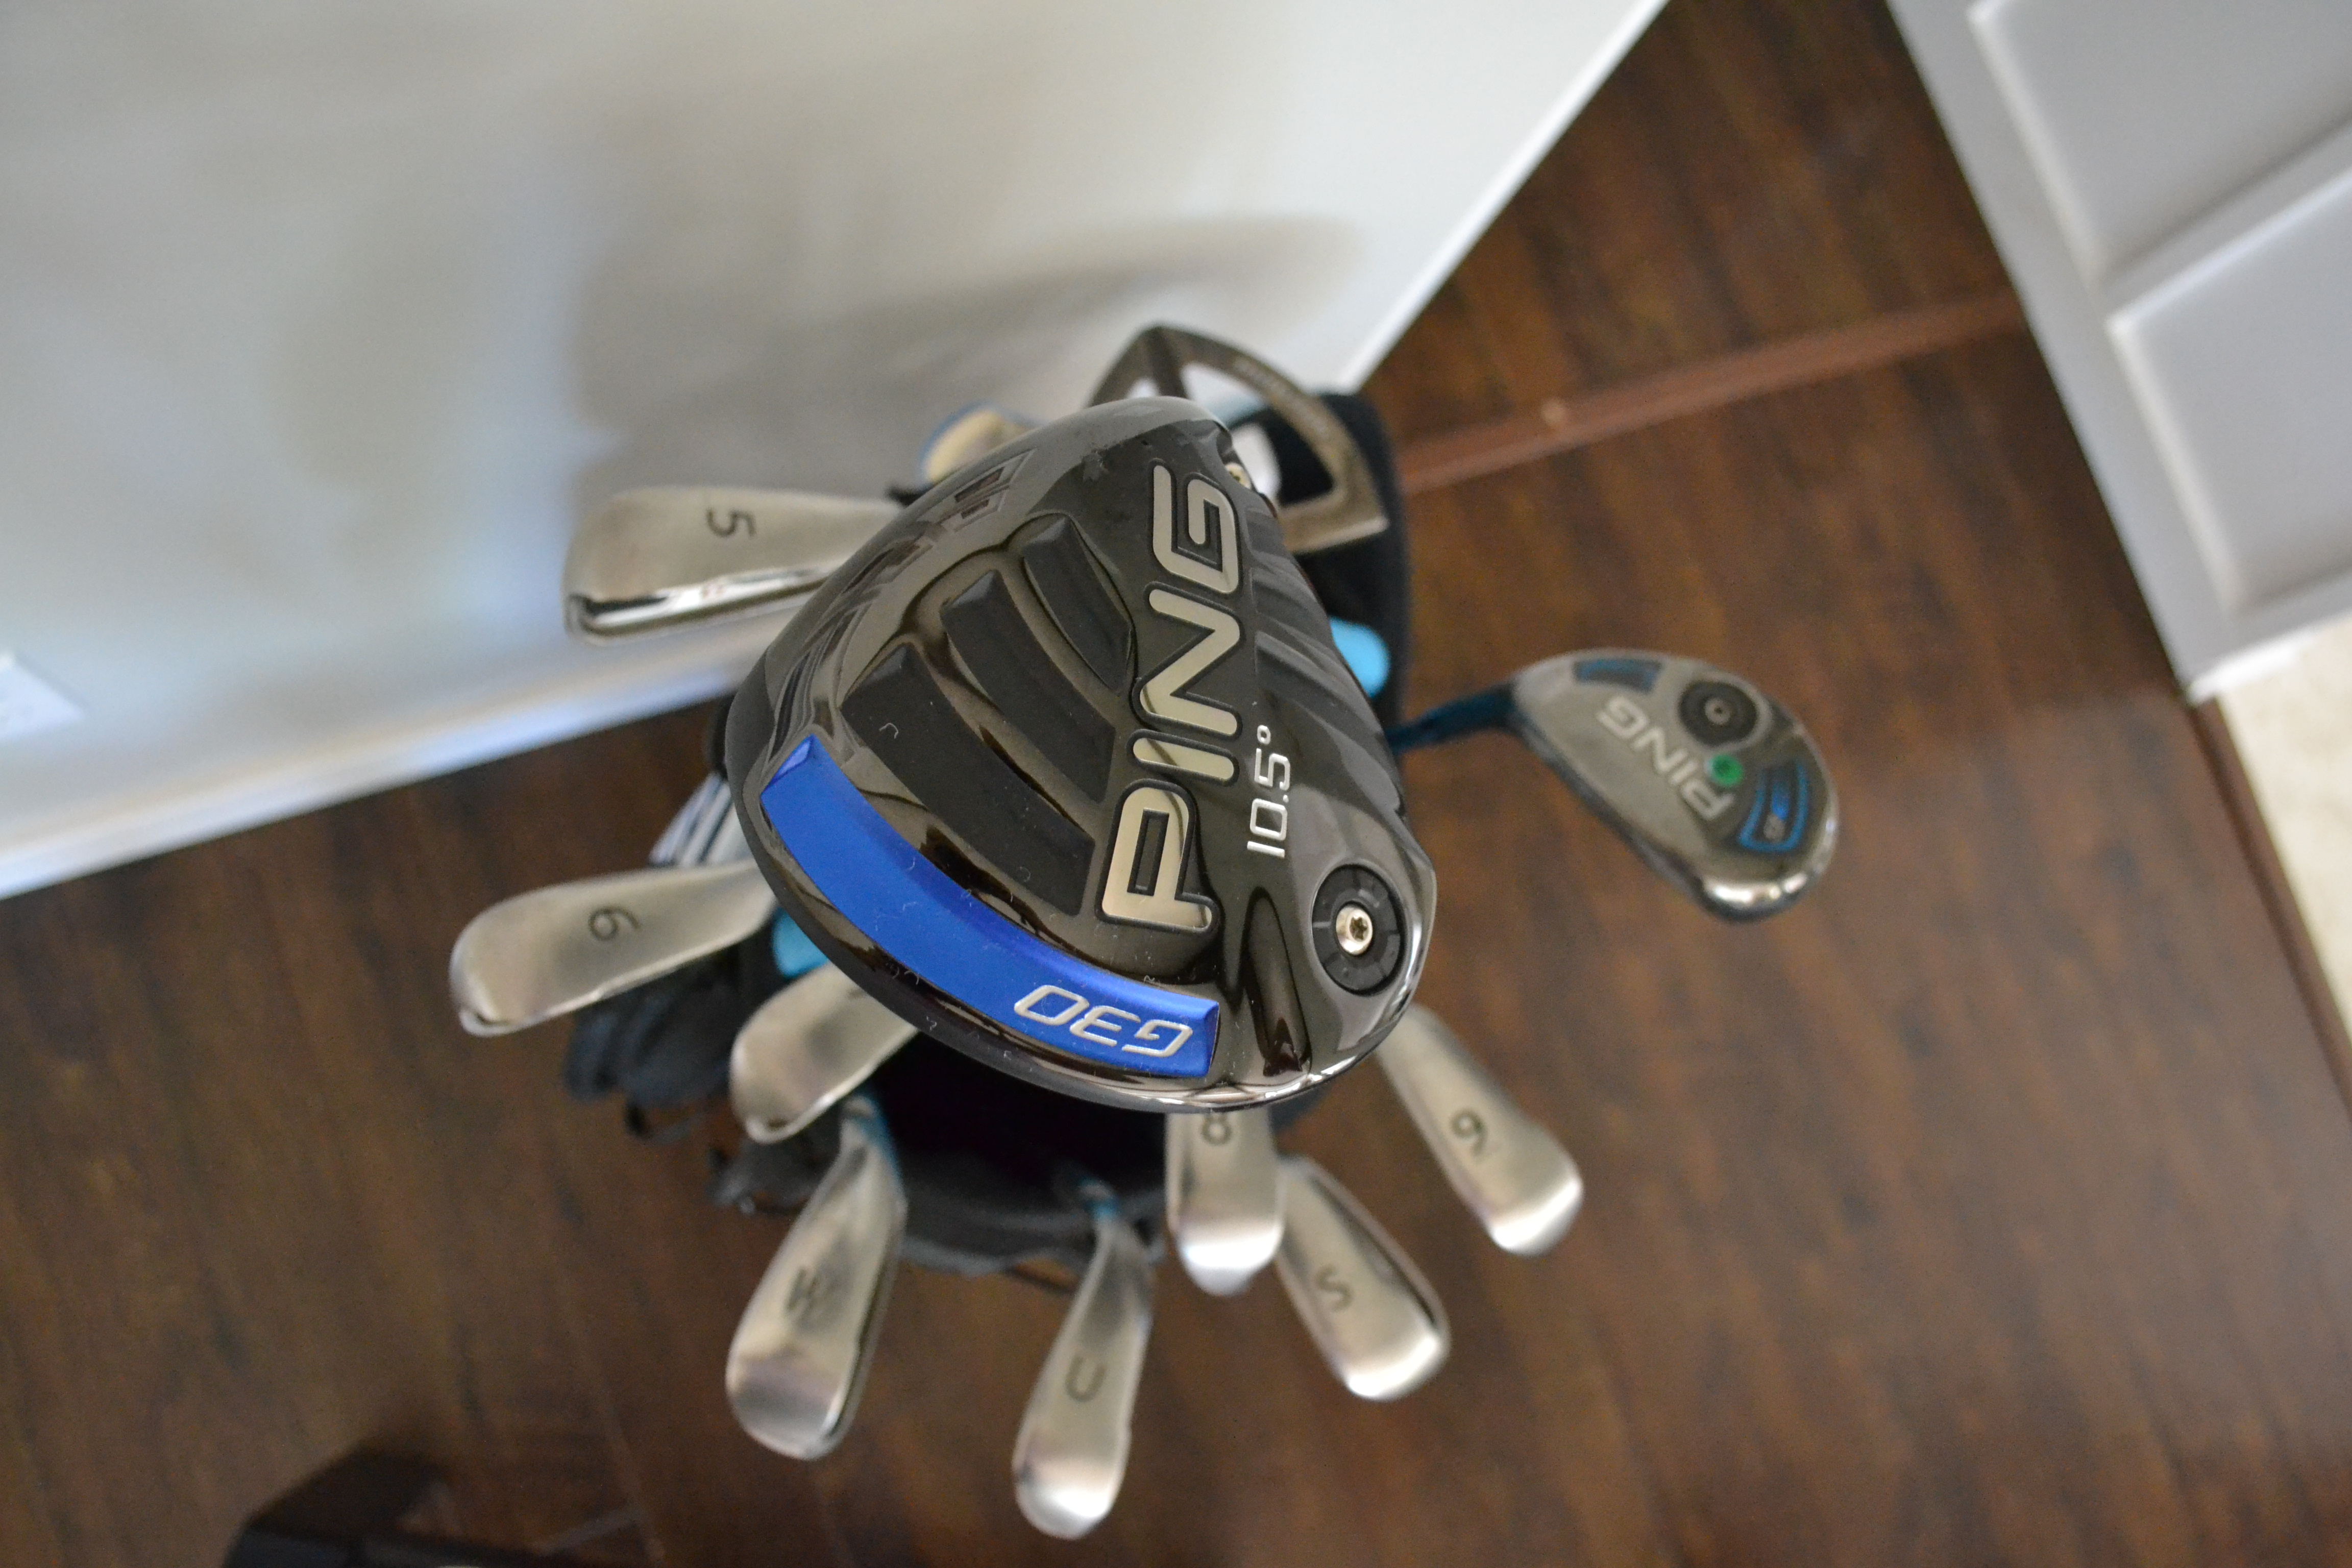 first set of clubs irons and driver